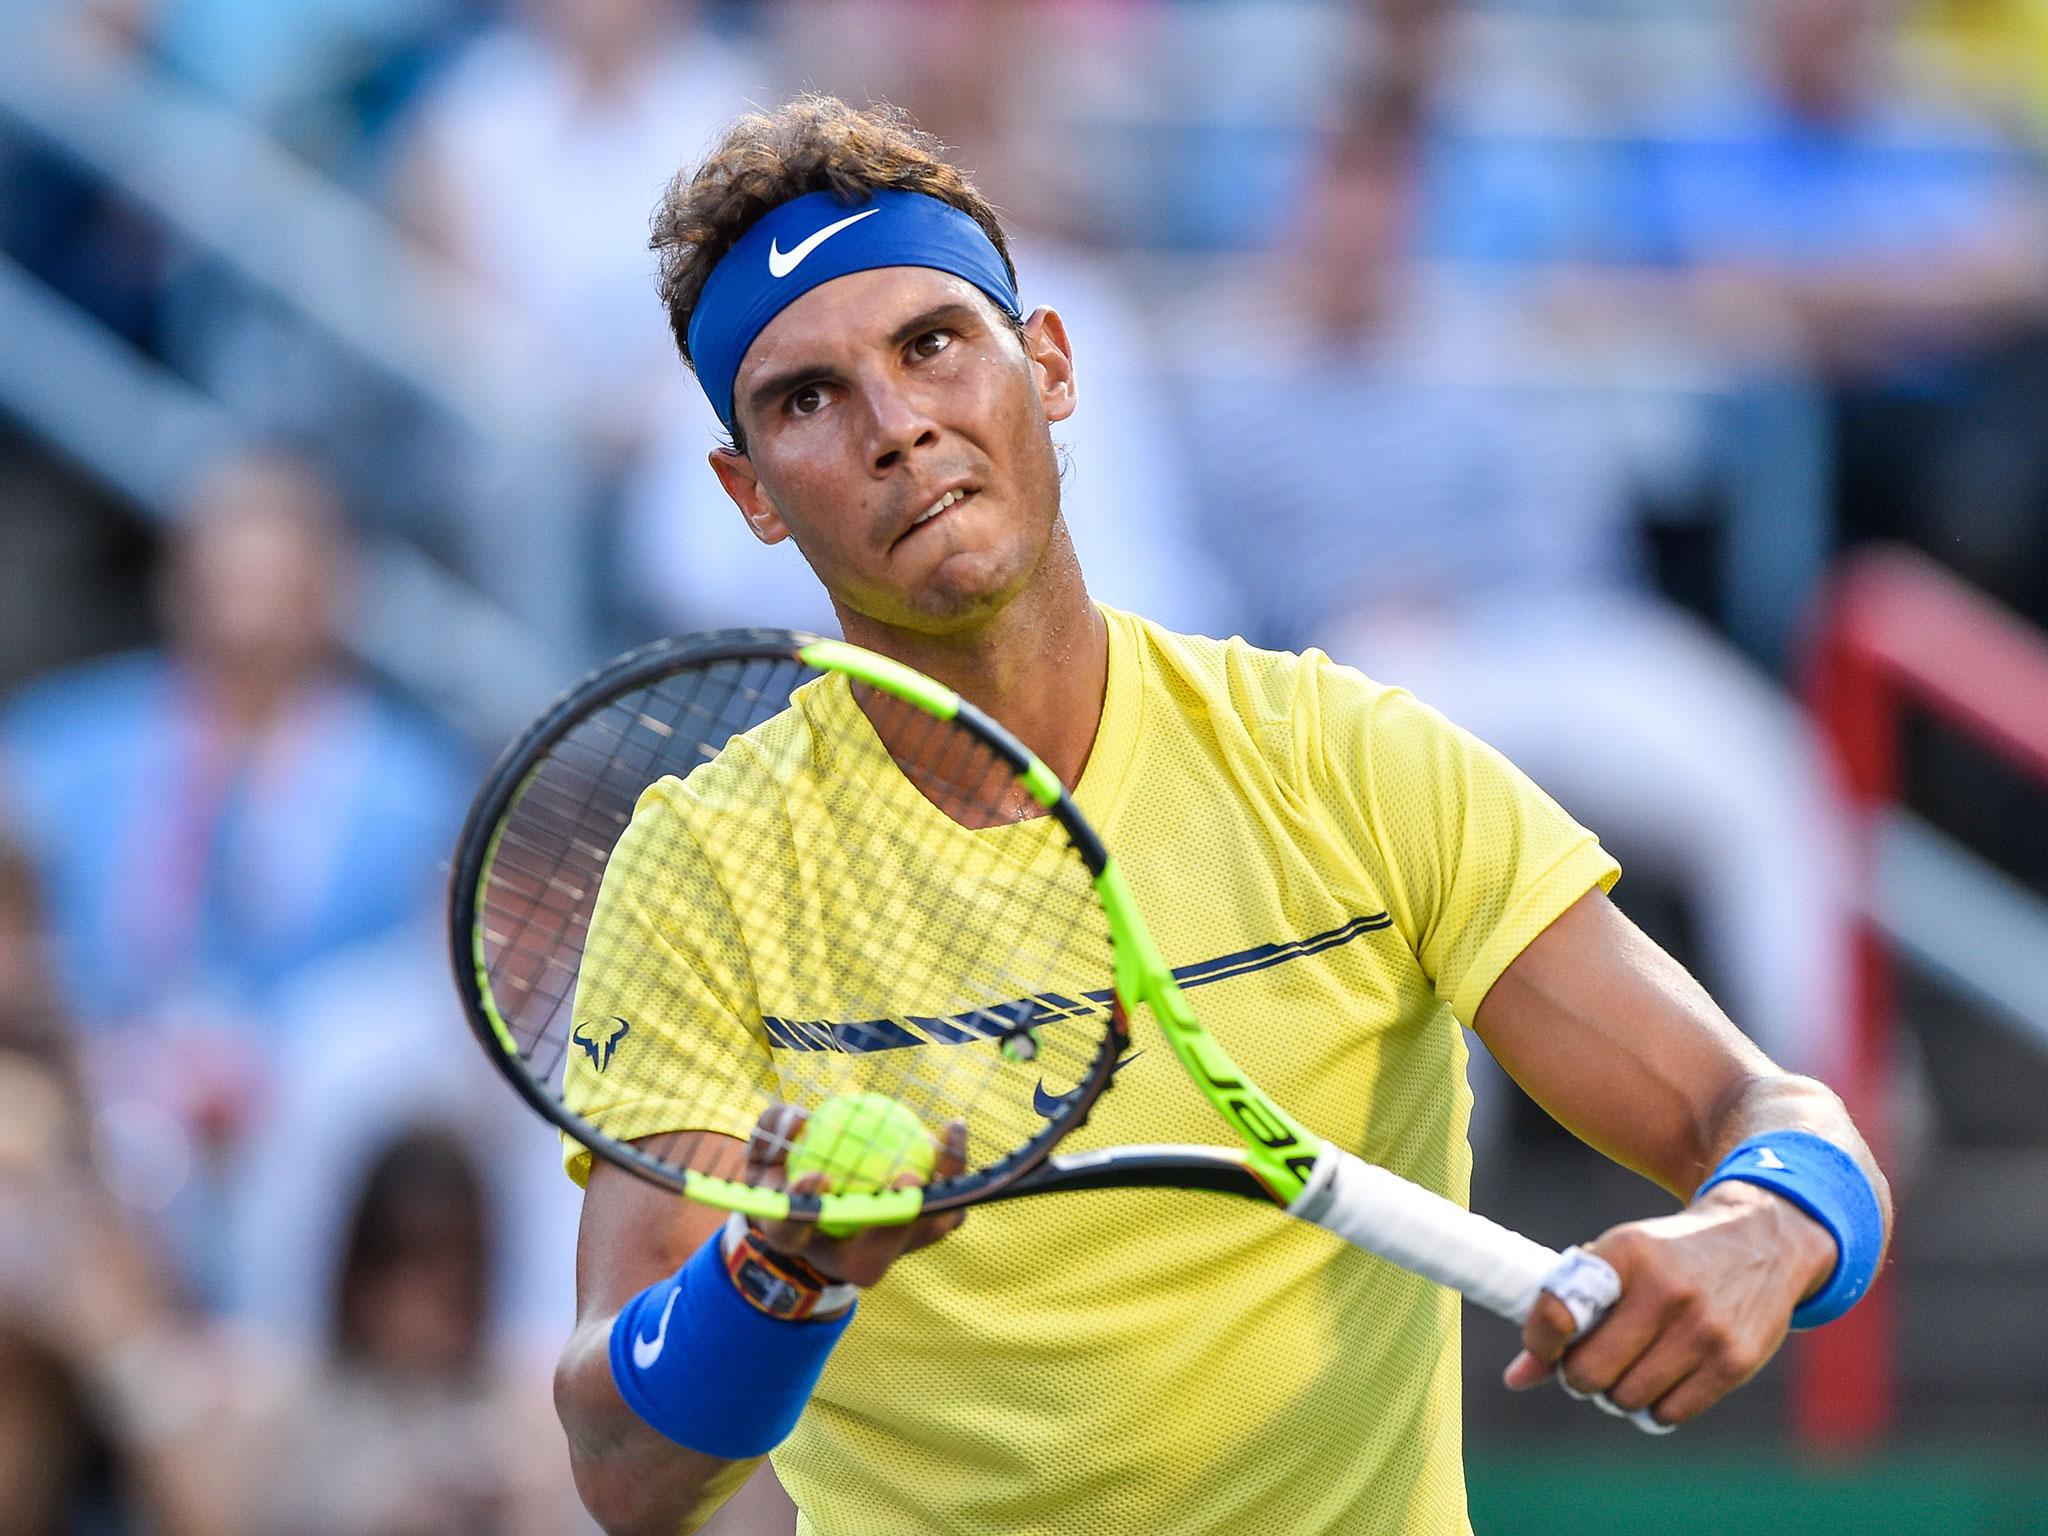 Rafael Nadal two wins away from No 1 ranking after strong start to Rogers Cup campaign The Independent The Independent